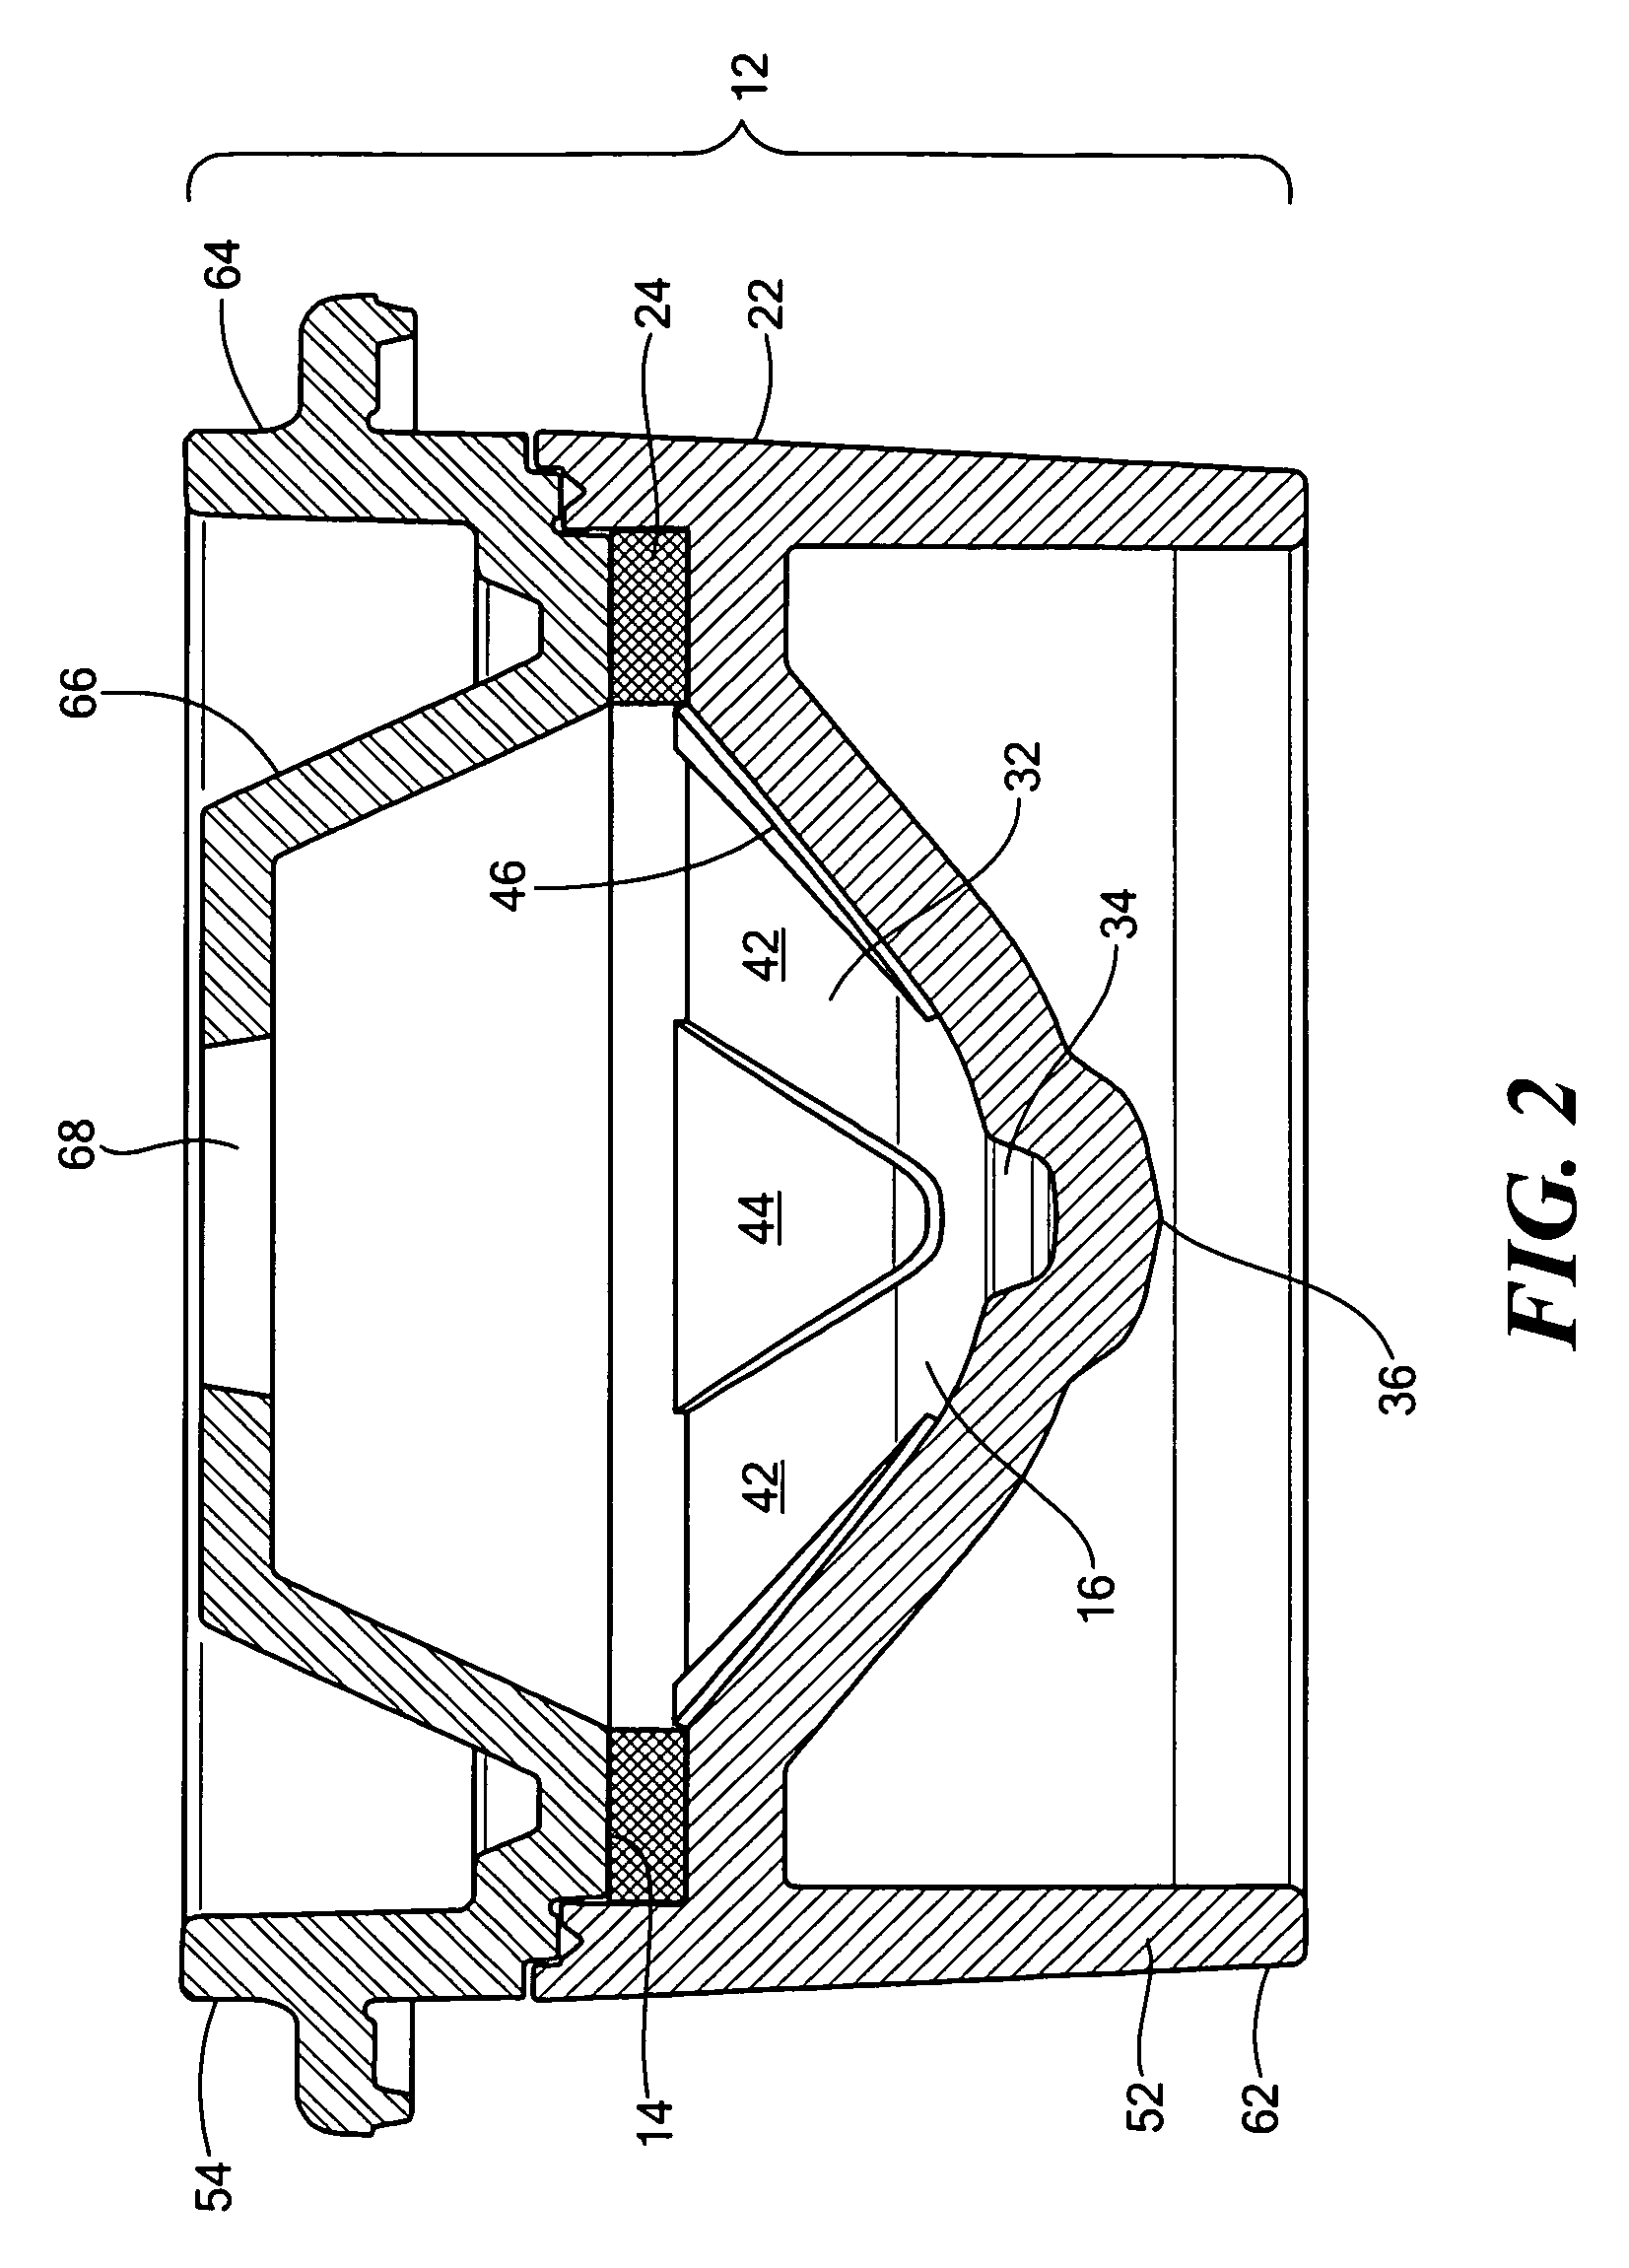 Centrifugal device and method for fluid component separation